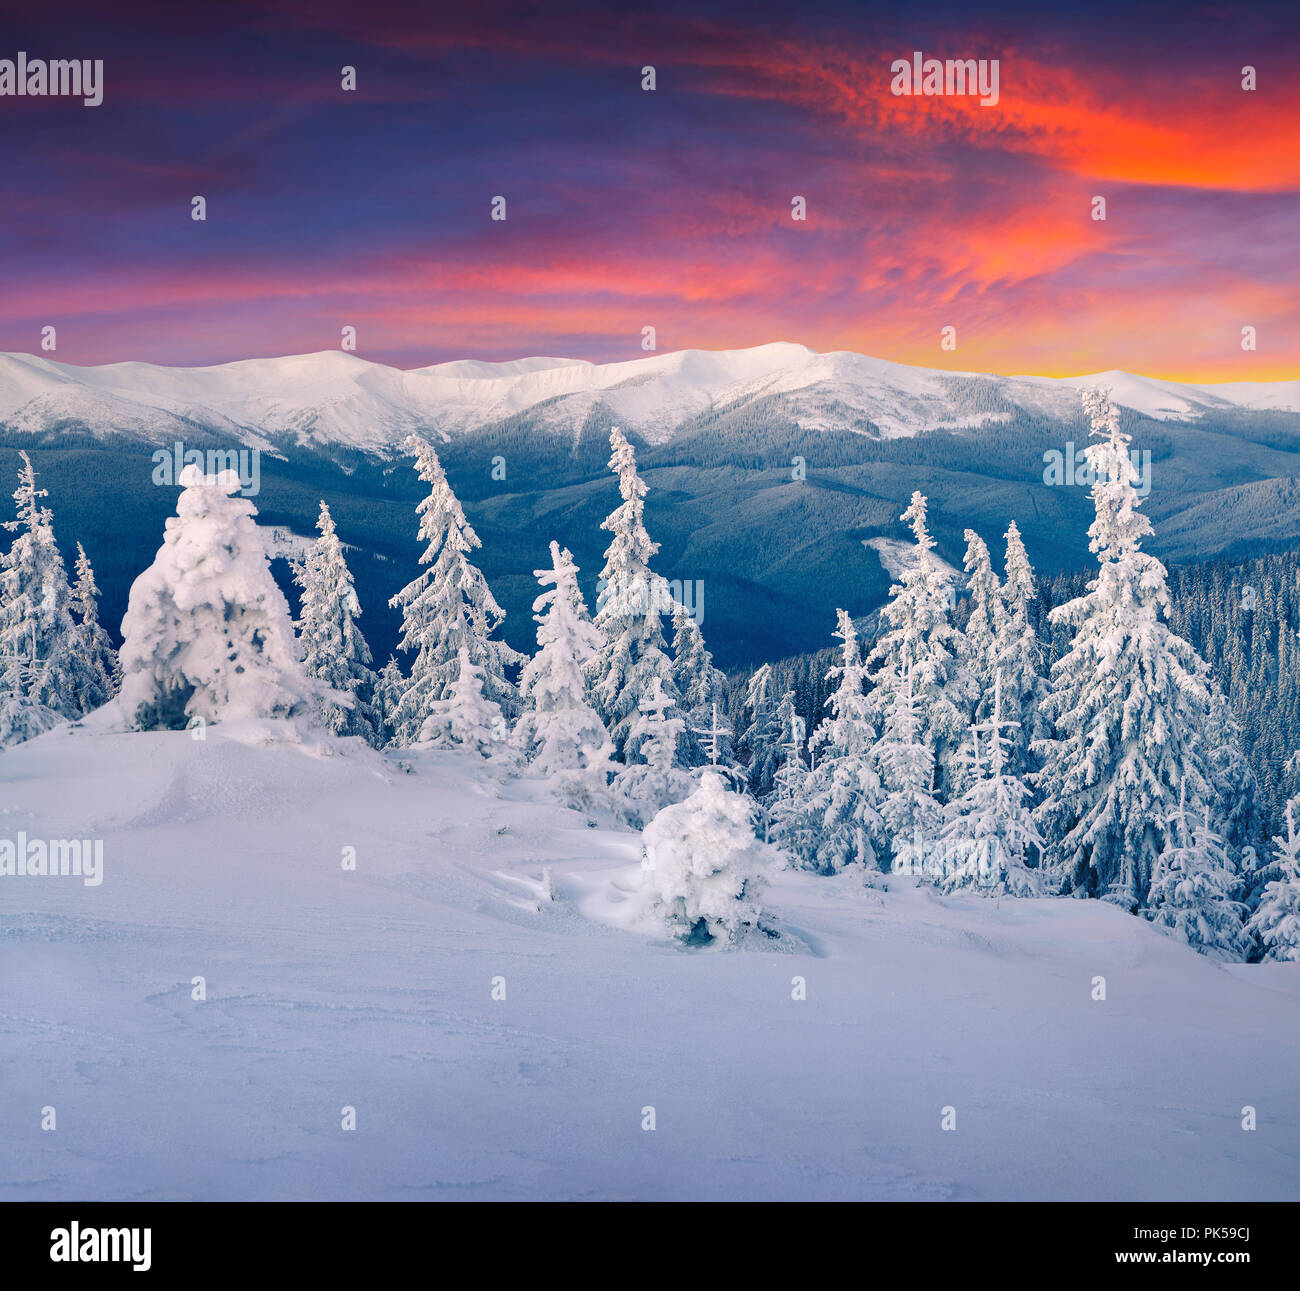 Colorful winter sunrise in the mountains. Happy New Year! Stock Photo